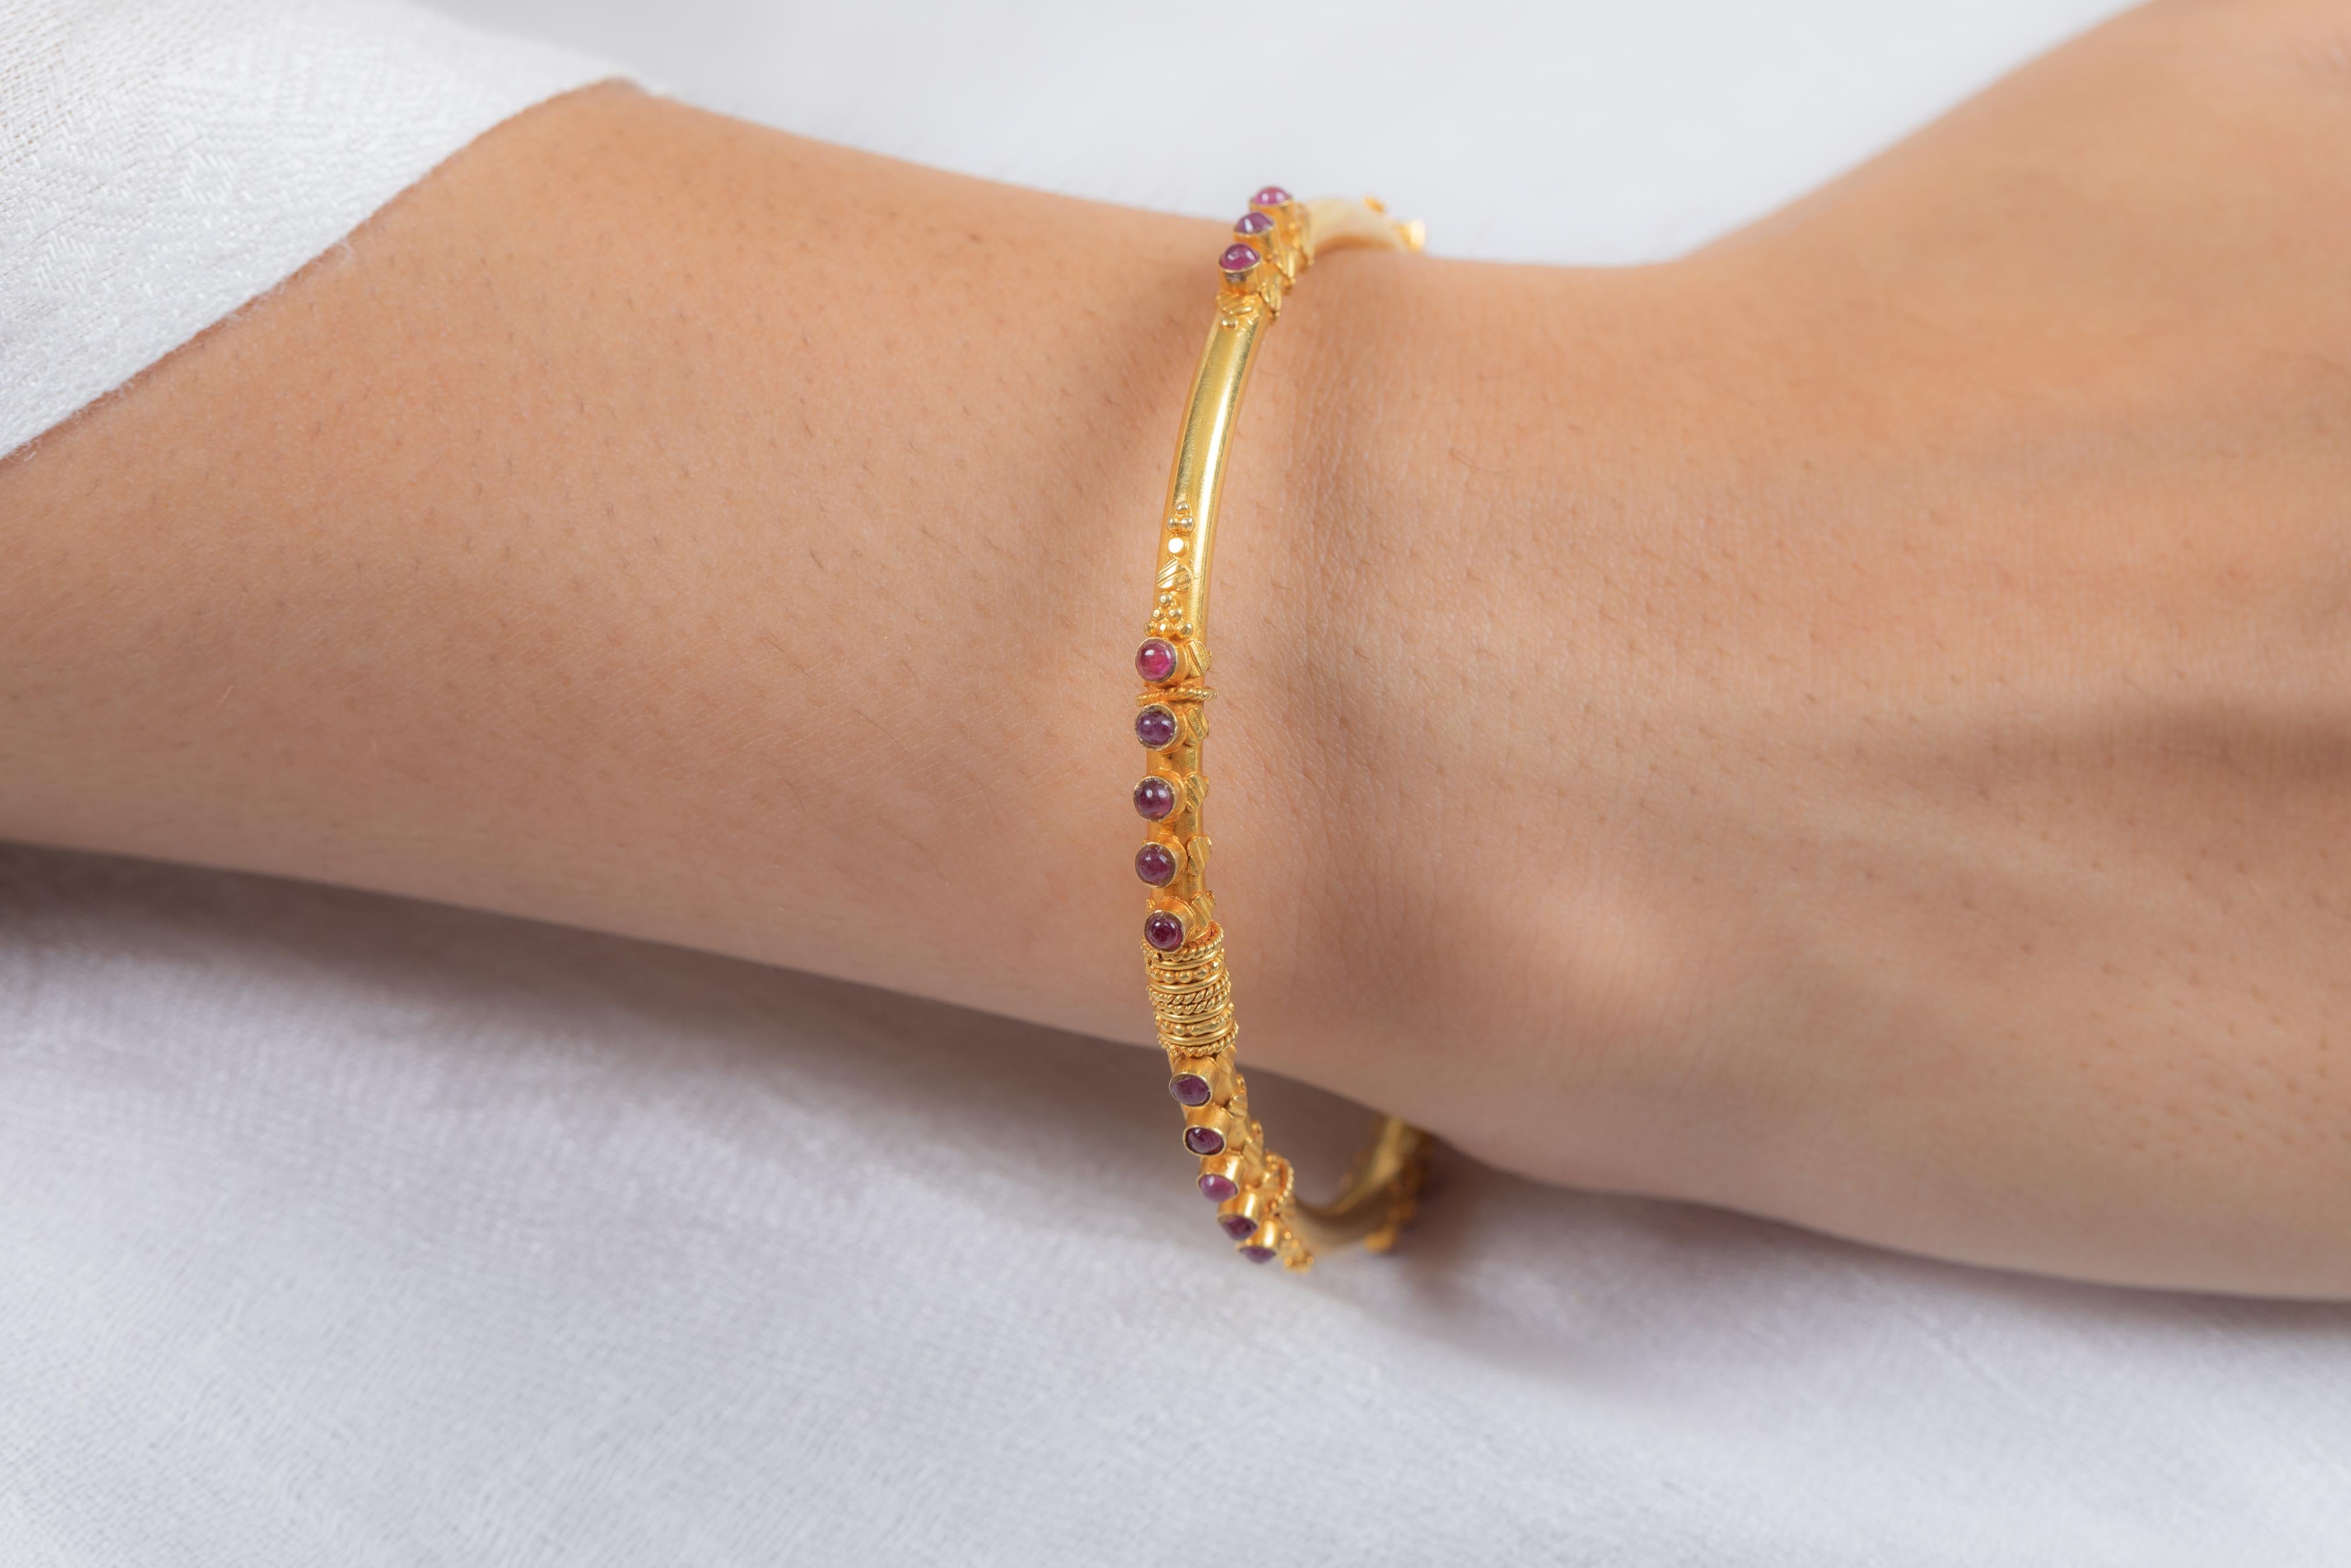 Ruby Bangle in 18K Gold. It’s a great jewelry ornament to wear on occasions and at the same time works as a wonderful gift for your loved ones. These lovely statement pieces are perfect generation jewelry to pass on.
Bangles feel comfortable while